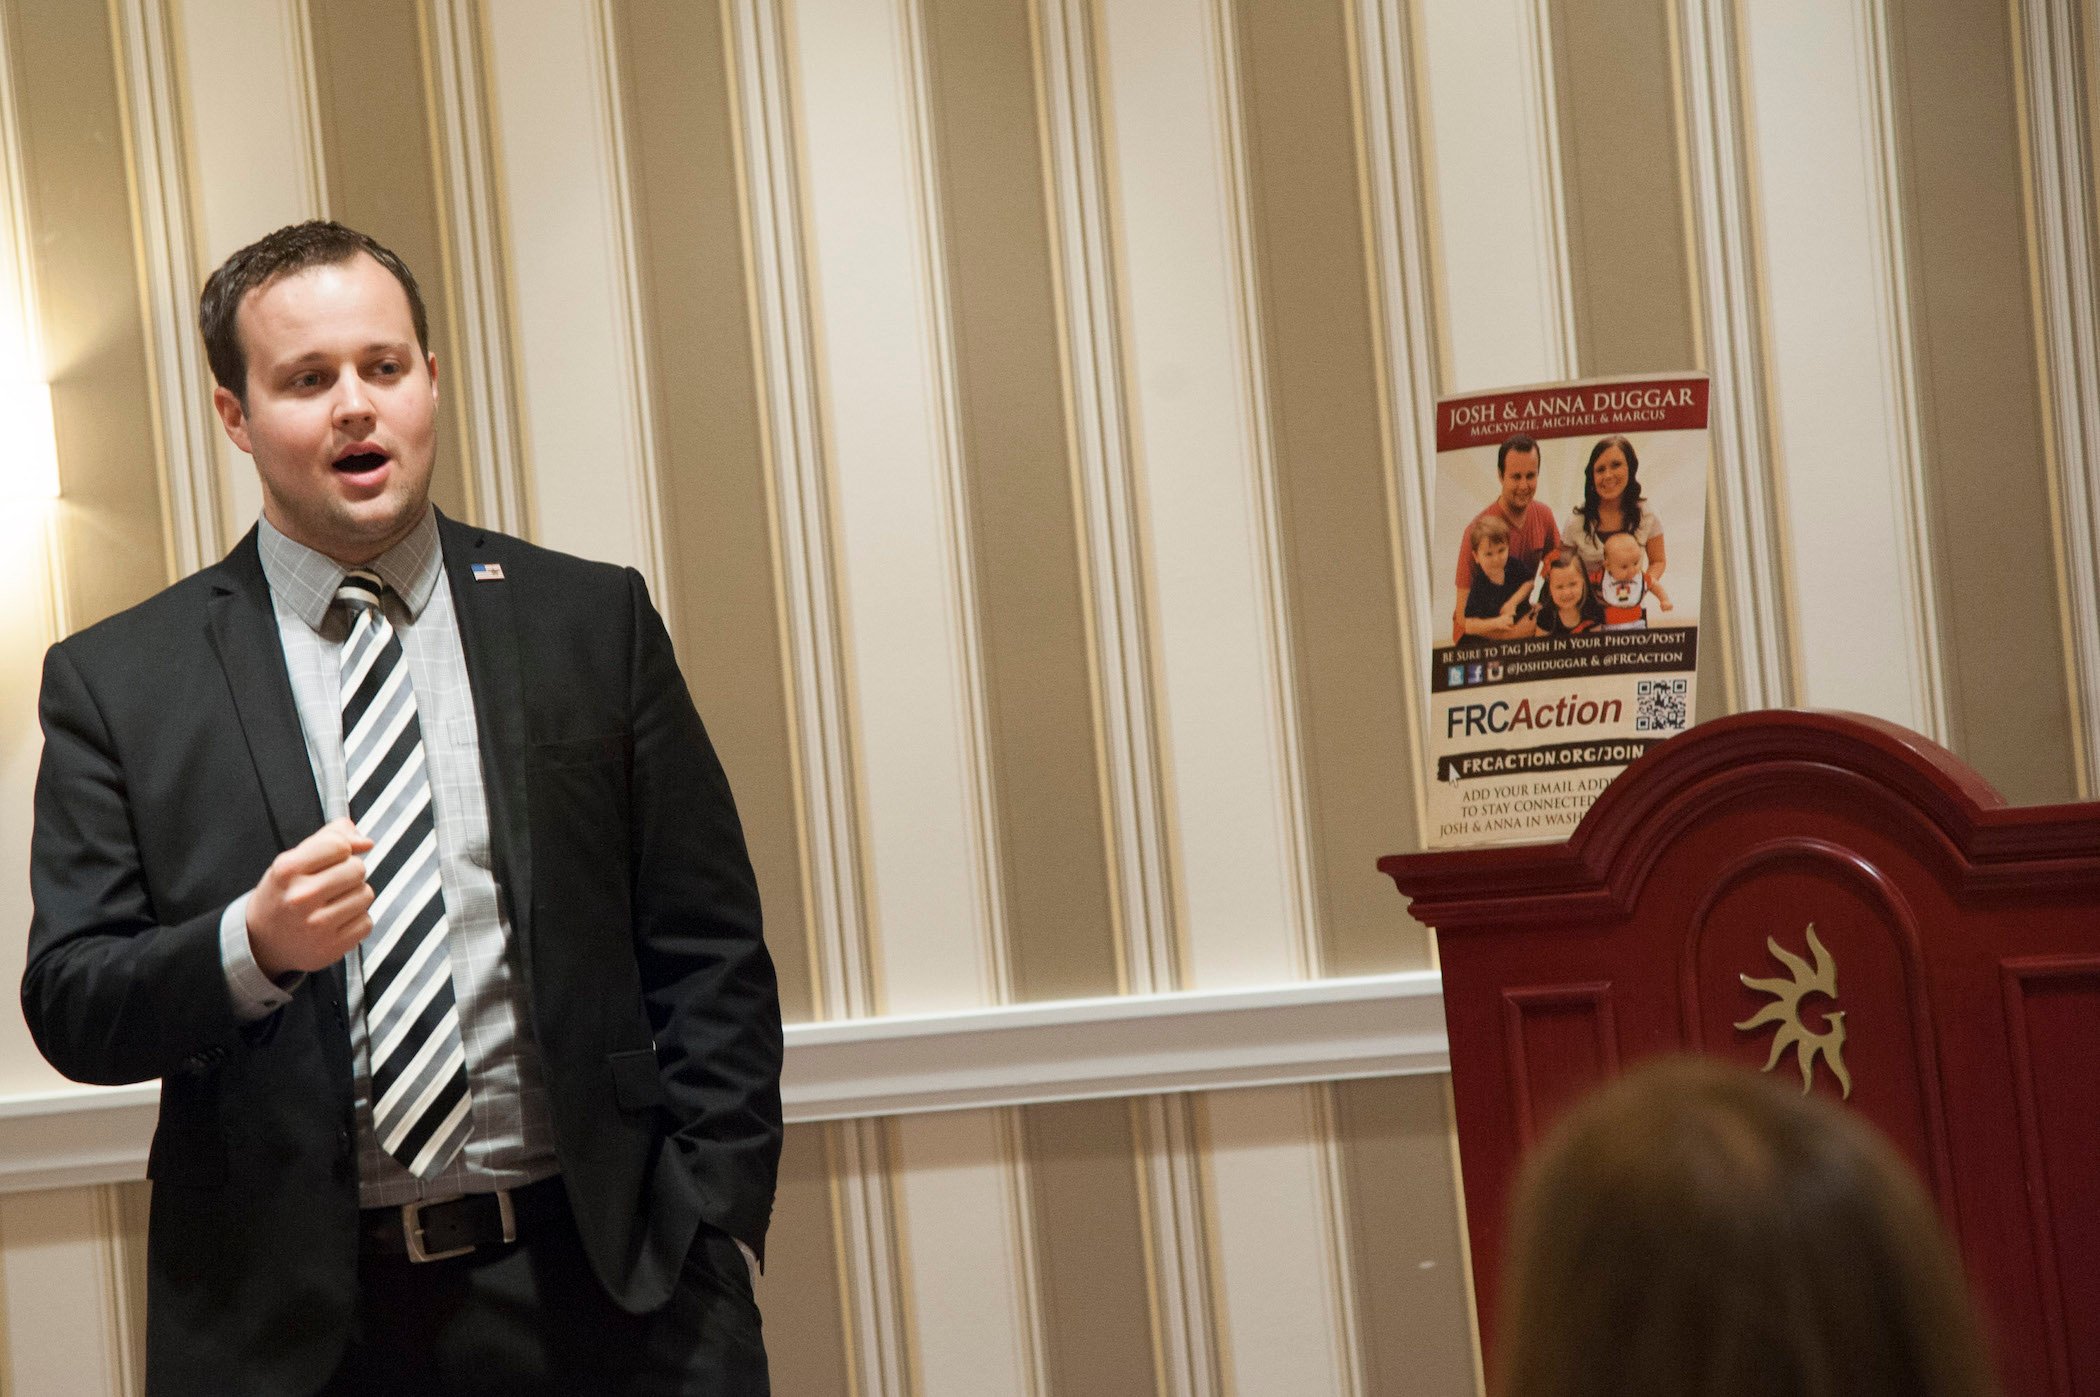 Josh Duggar of the Duggar family speaking at a conference. Josh Duggar's trial concluded in December 2021